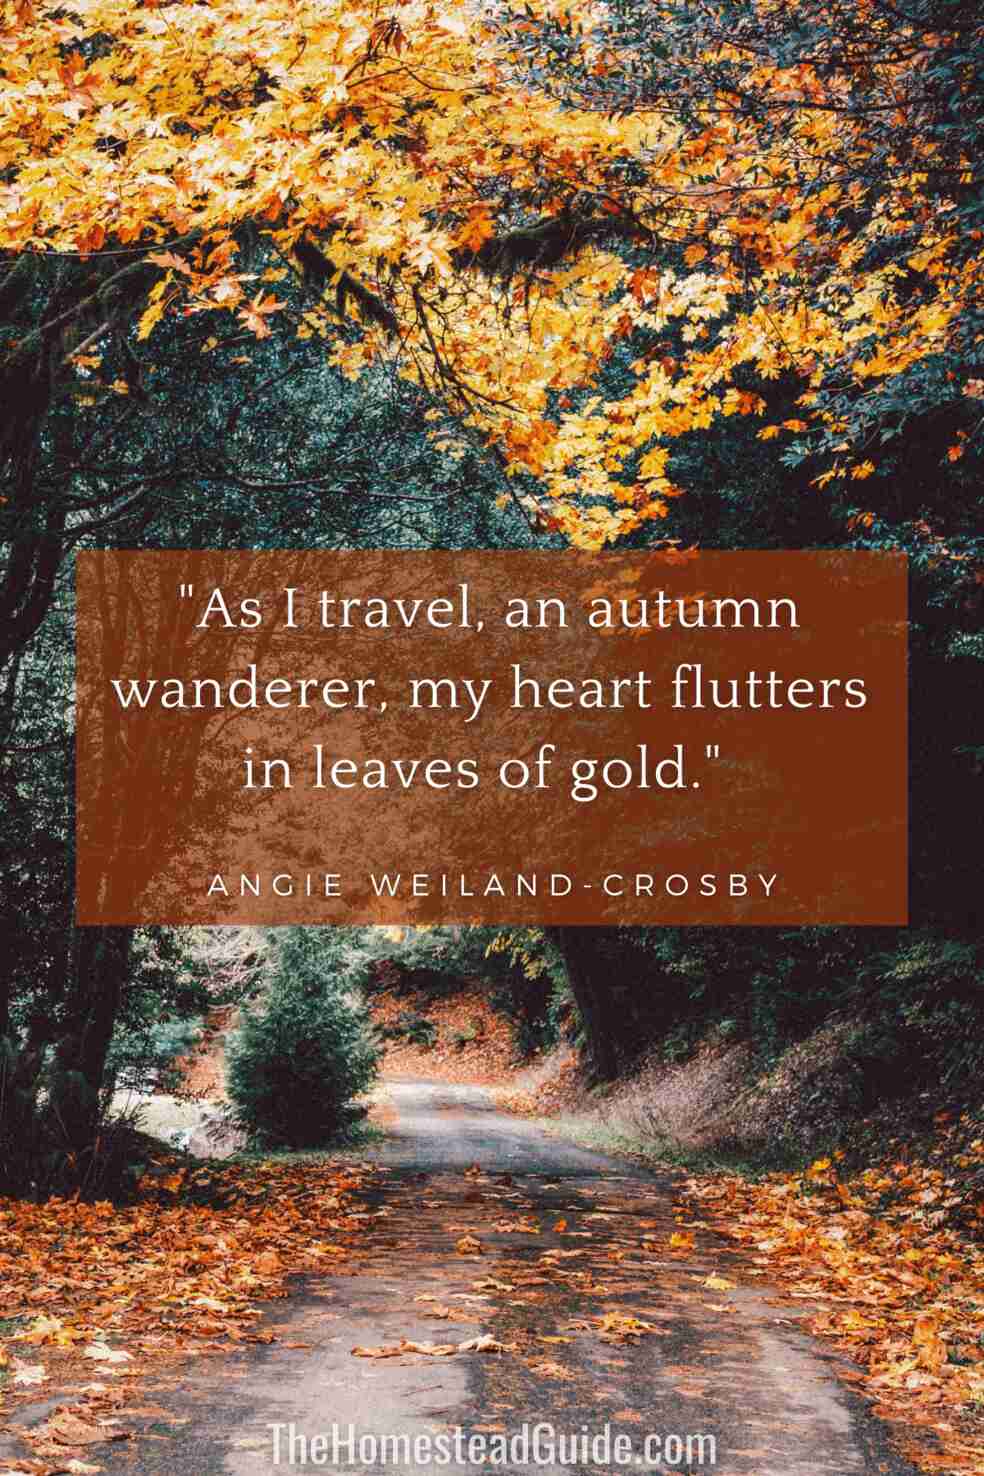 As I travel, an autumn wanderer, my heart flutters in leaves of gold.